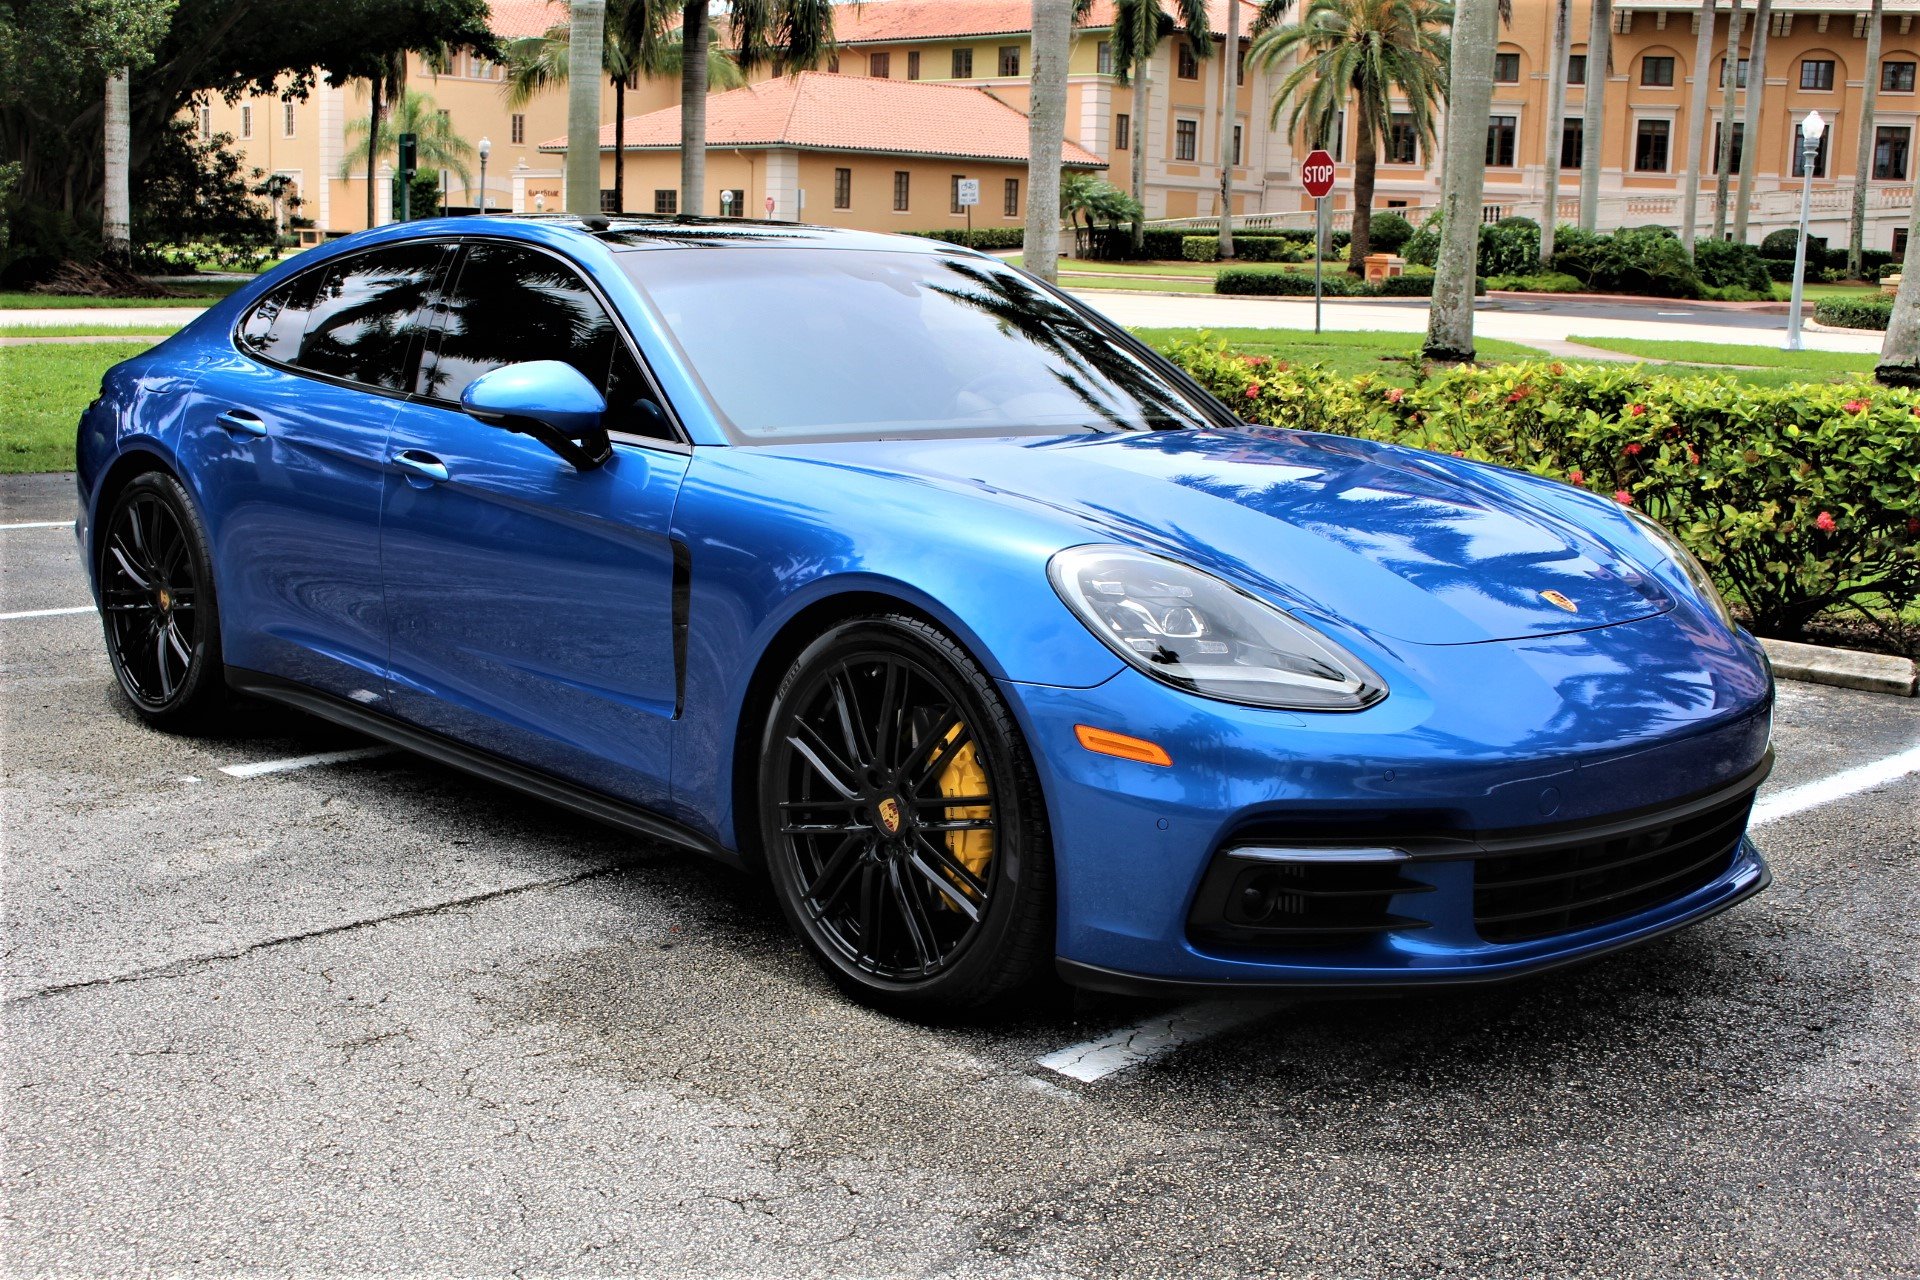 Used 2017 Porsche Panamera 4S for sale Sold at The Gables Sports Cars in Miami FL 33146 2